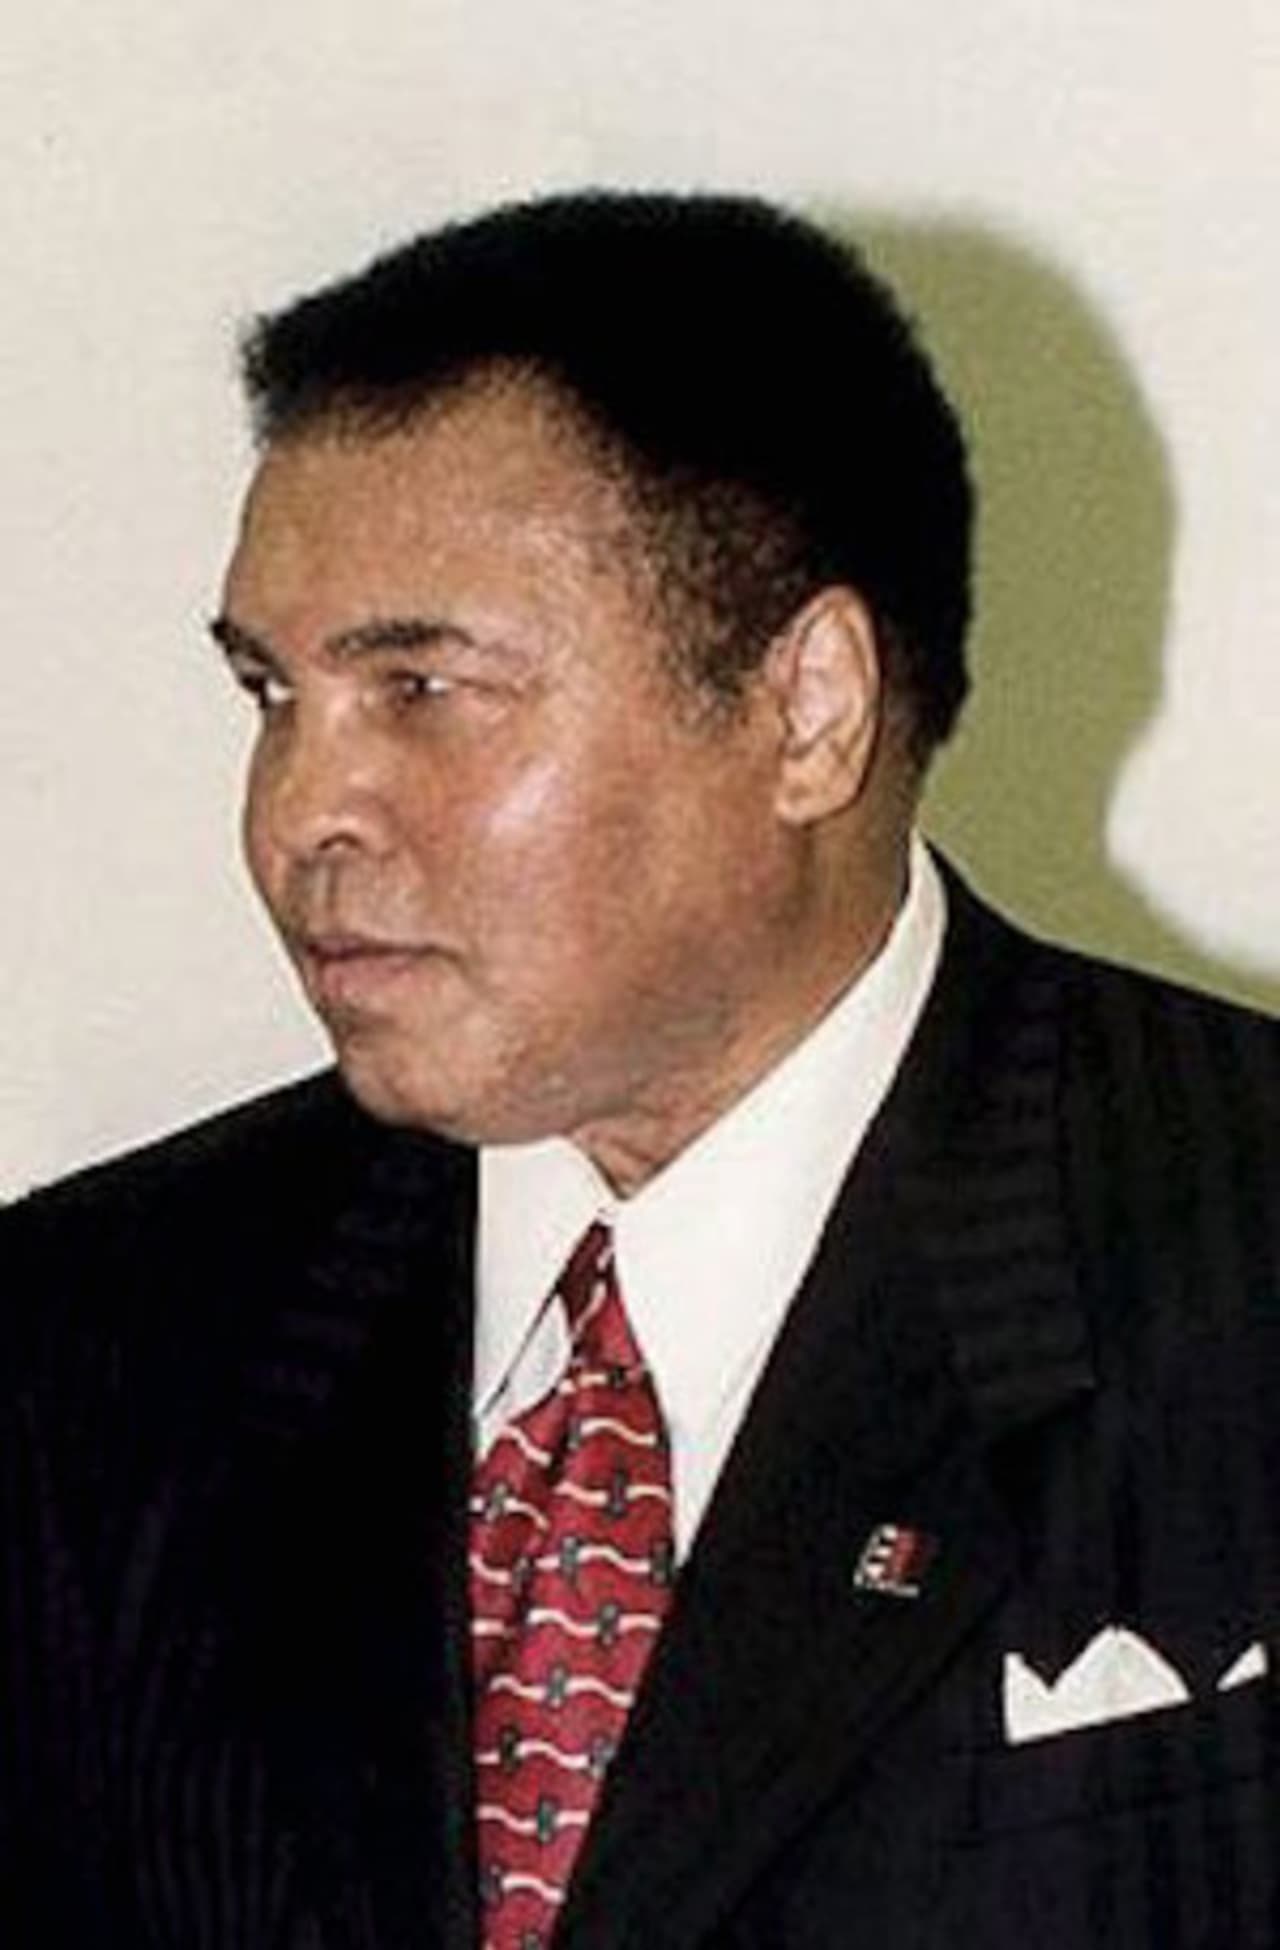 Muhammad Ali has died at the age of 74.